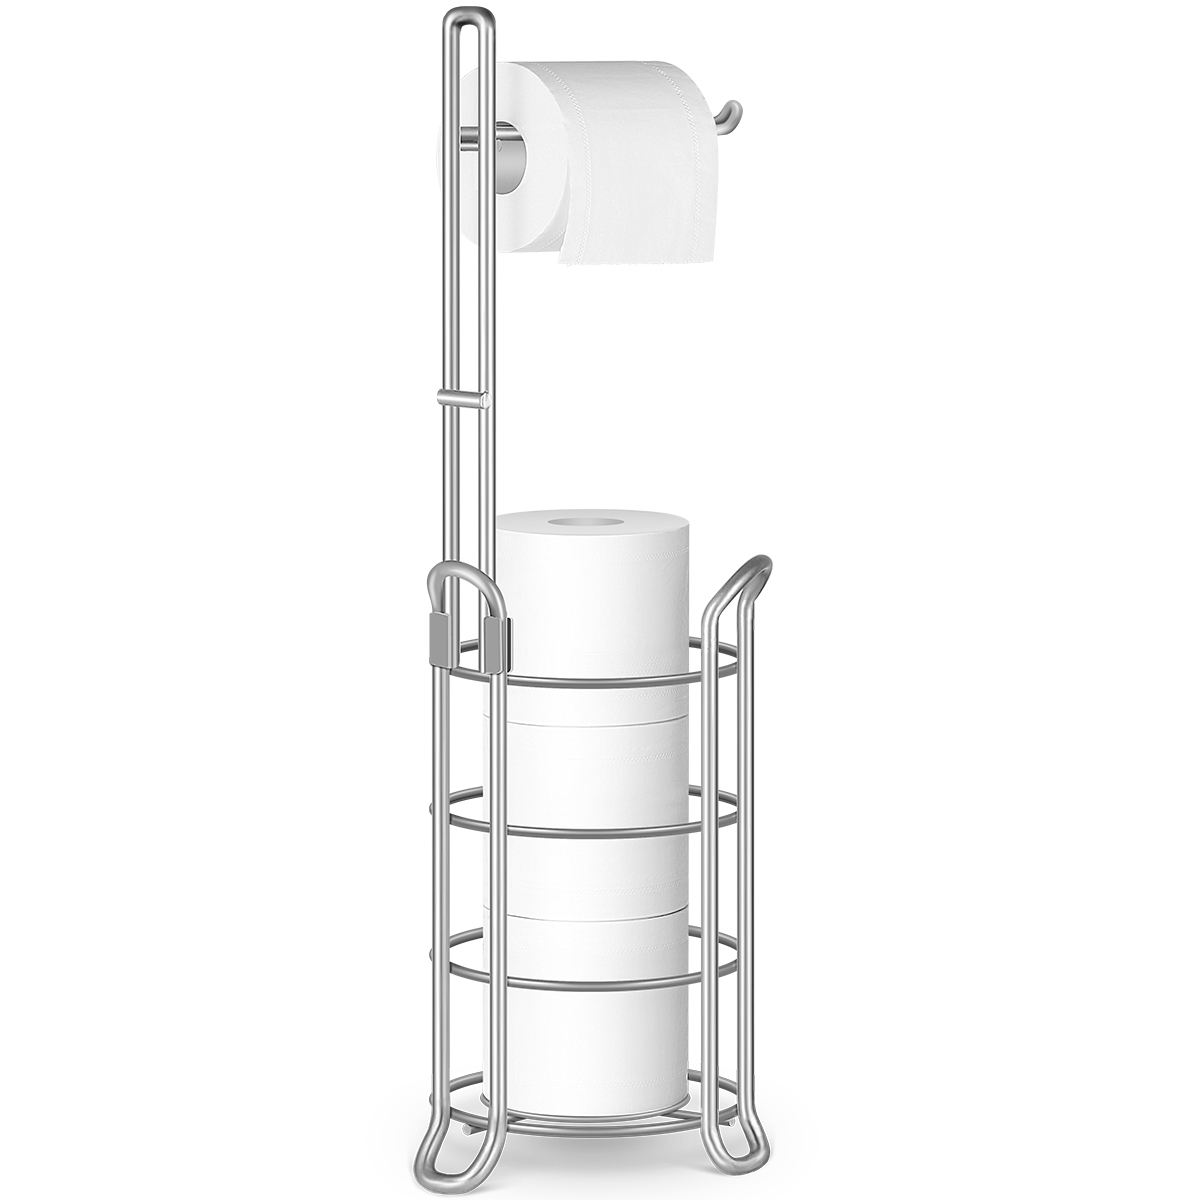 TomCare Toilet Paper Holder Toilet Paper Stand Free-Standing Toilet Tissue Paper Roll Bathroom Storage Shelf and Dispenser for 3 Spare Rolls Metal Wire Bathroom Accessories Storage Organizer Silver